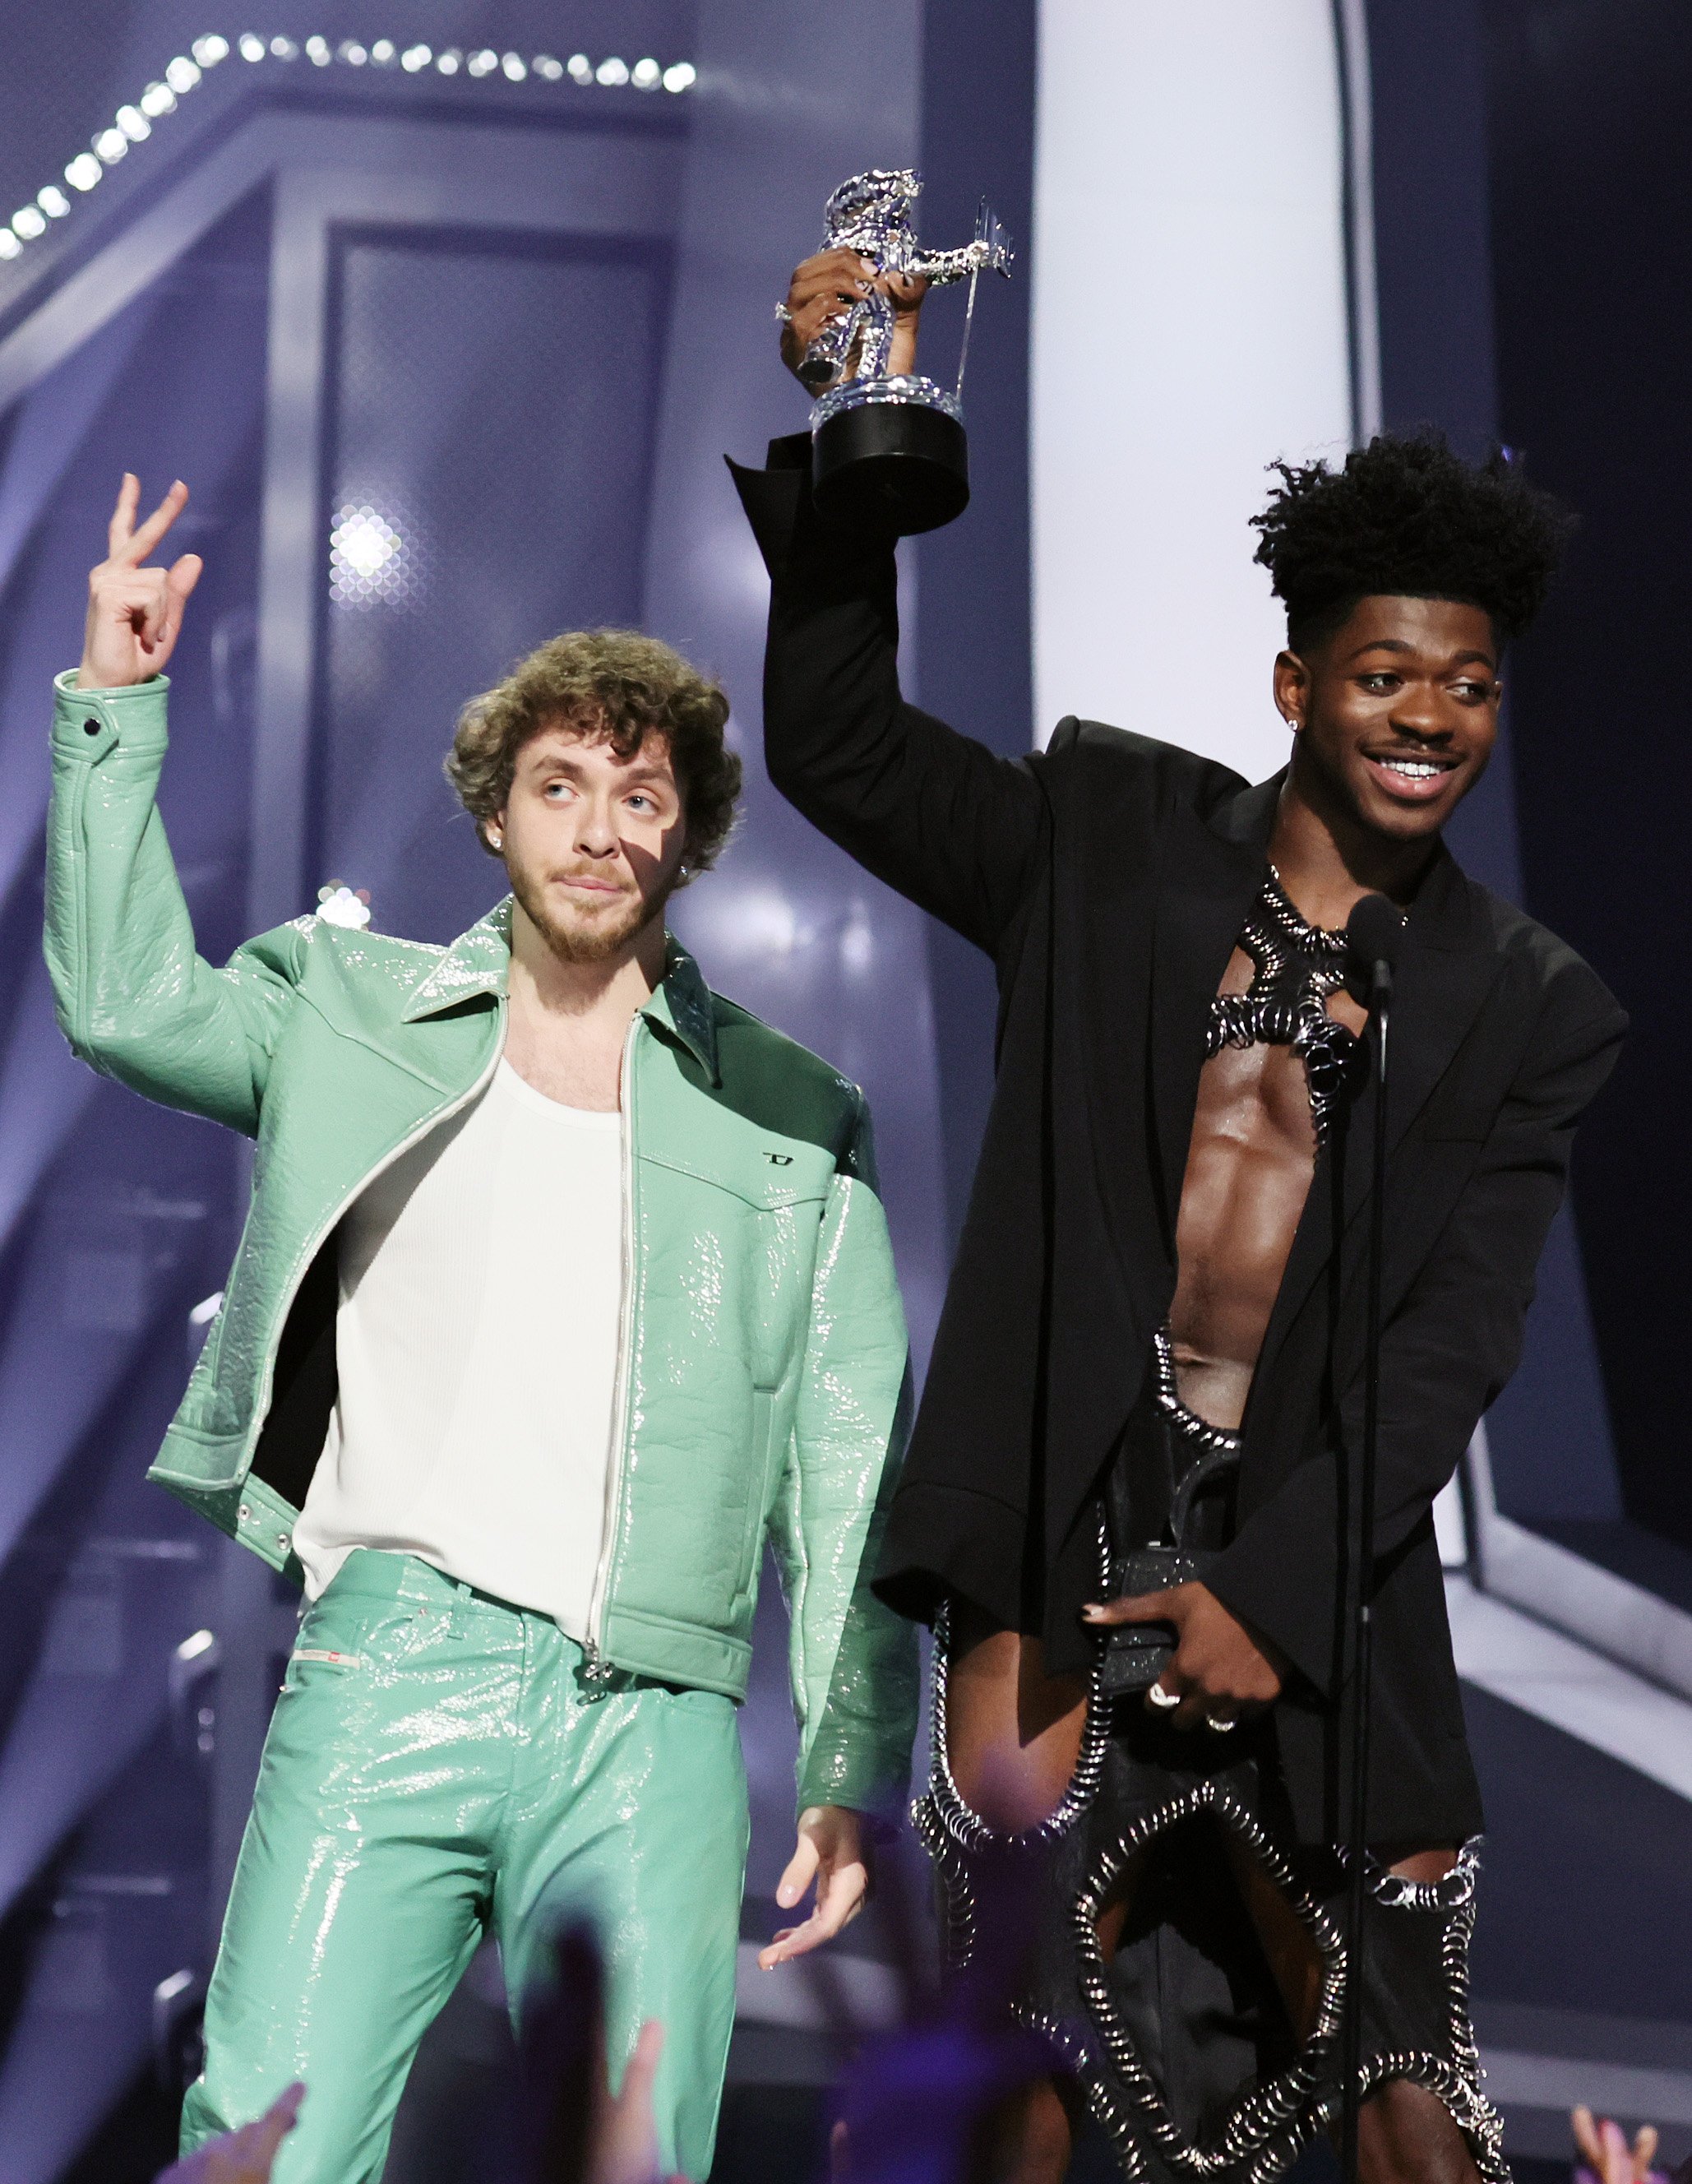 Lil Nas X and Jack Harlow accept an award onstage at the 2022 MTV VMAs at Prudential Center on August 28, 2022, in Newark, New Jersey. | Source: Getty Images